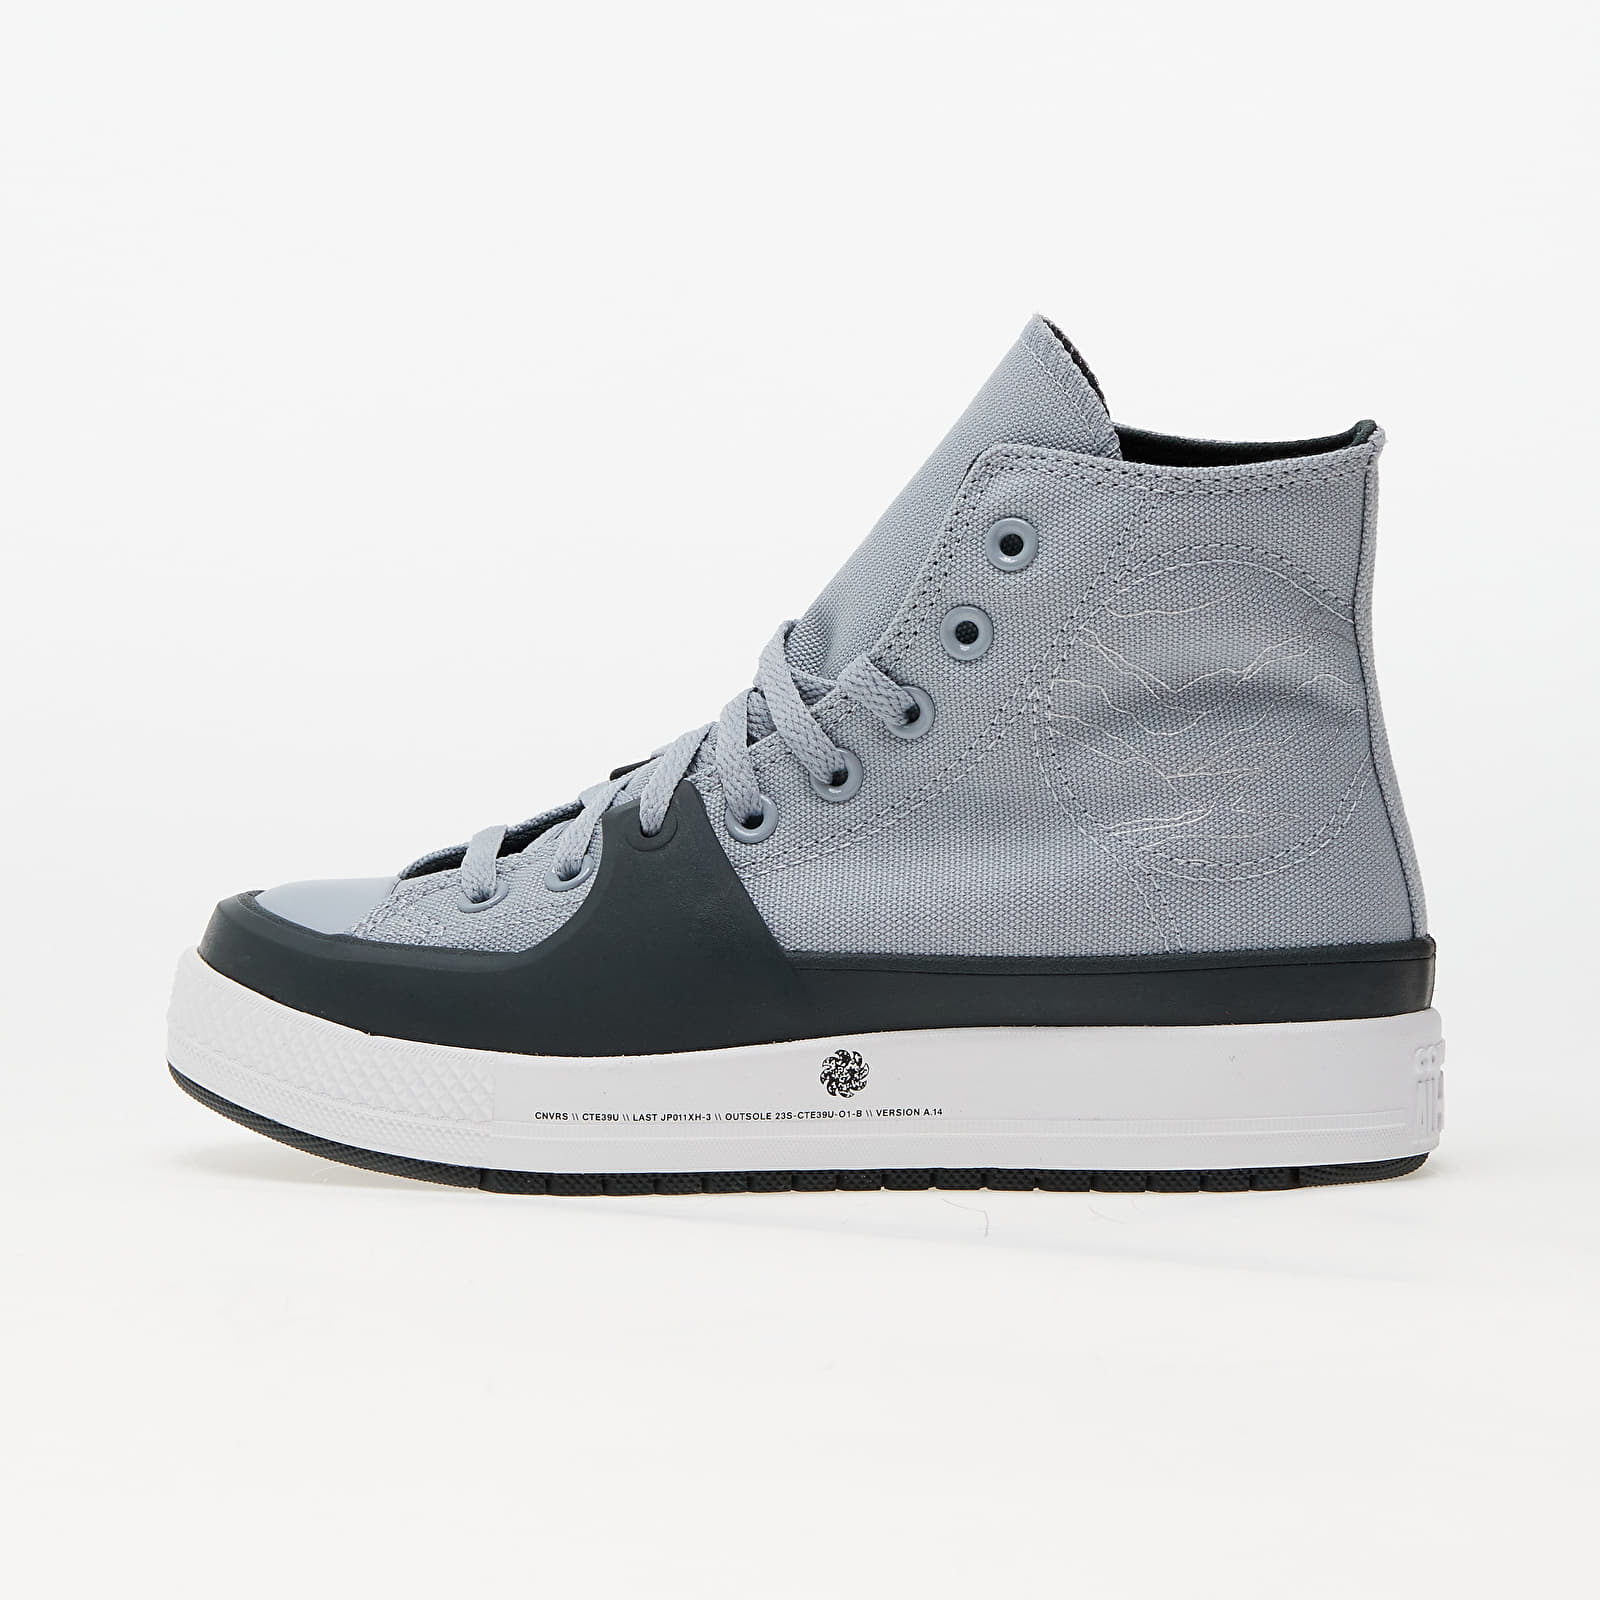 Men's shoes Converse Chuck Taylor All Star Construct Future Utility Heirloom Silver/ Secret Pines